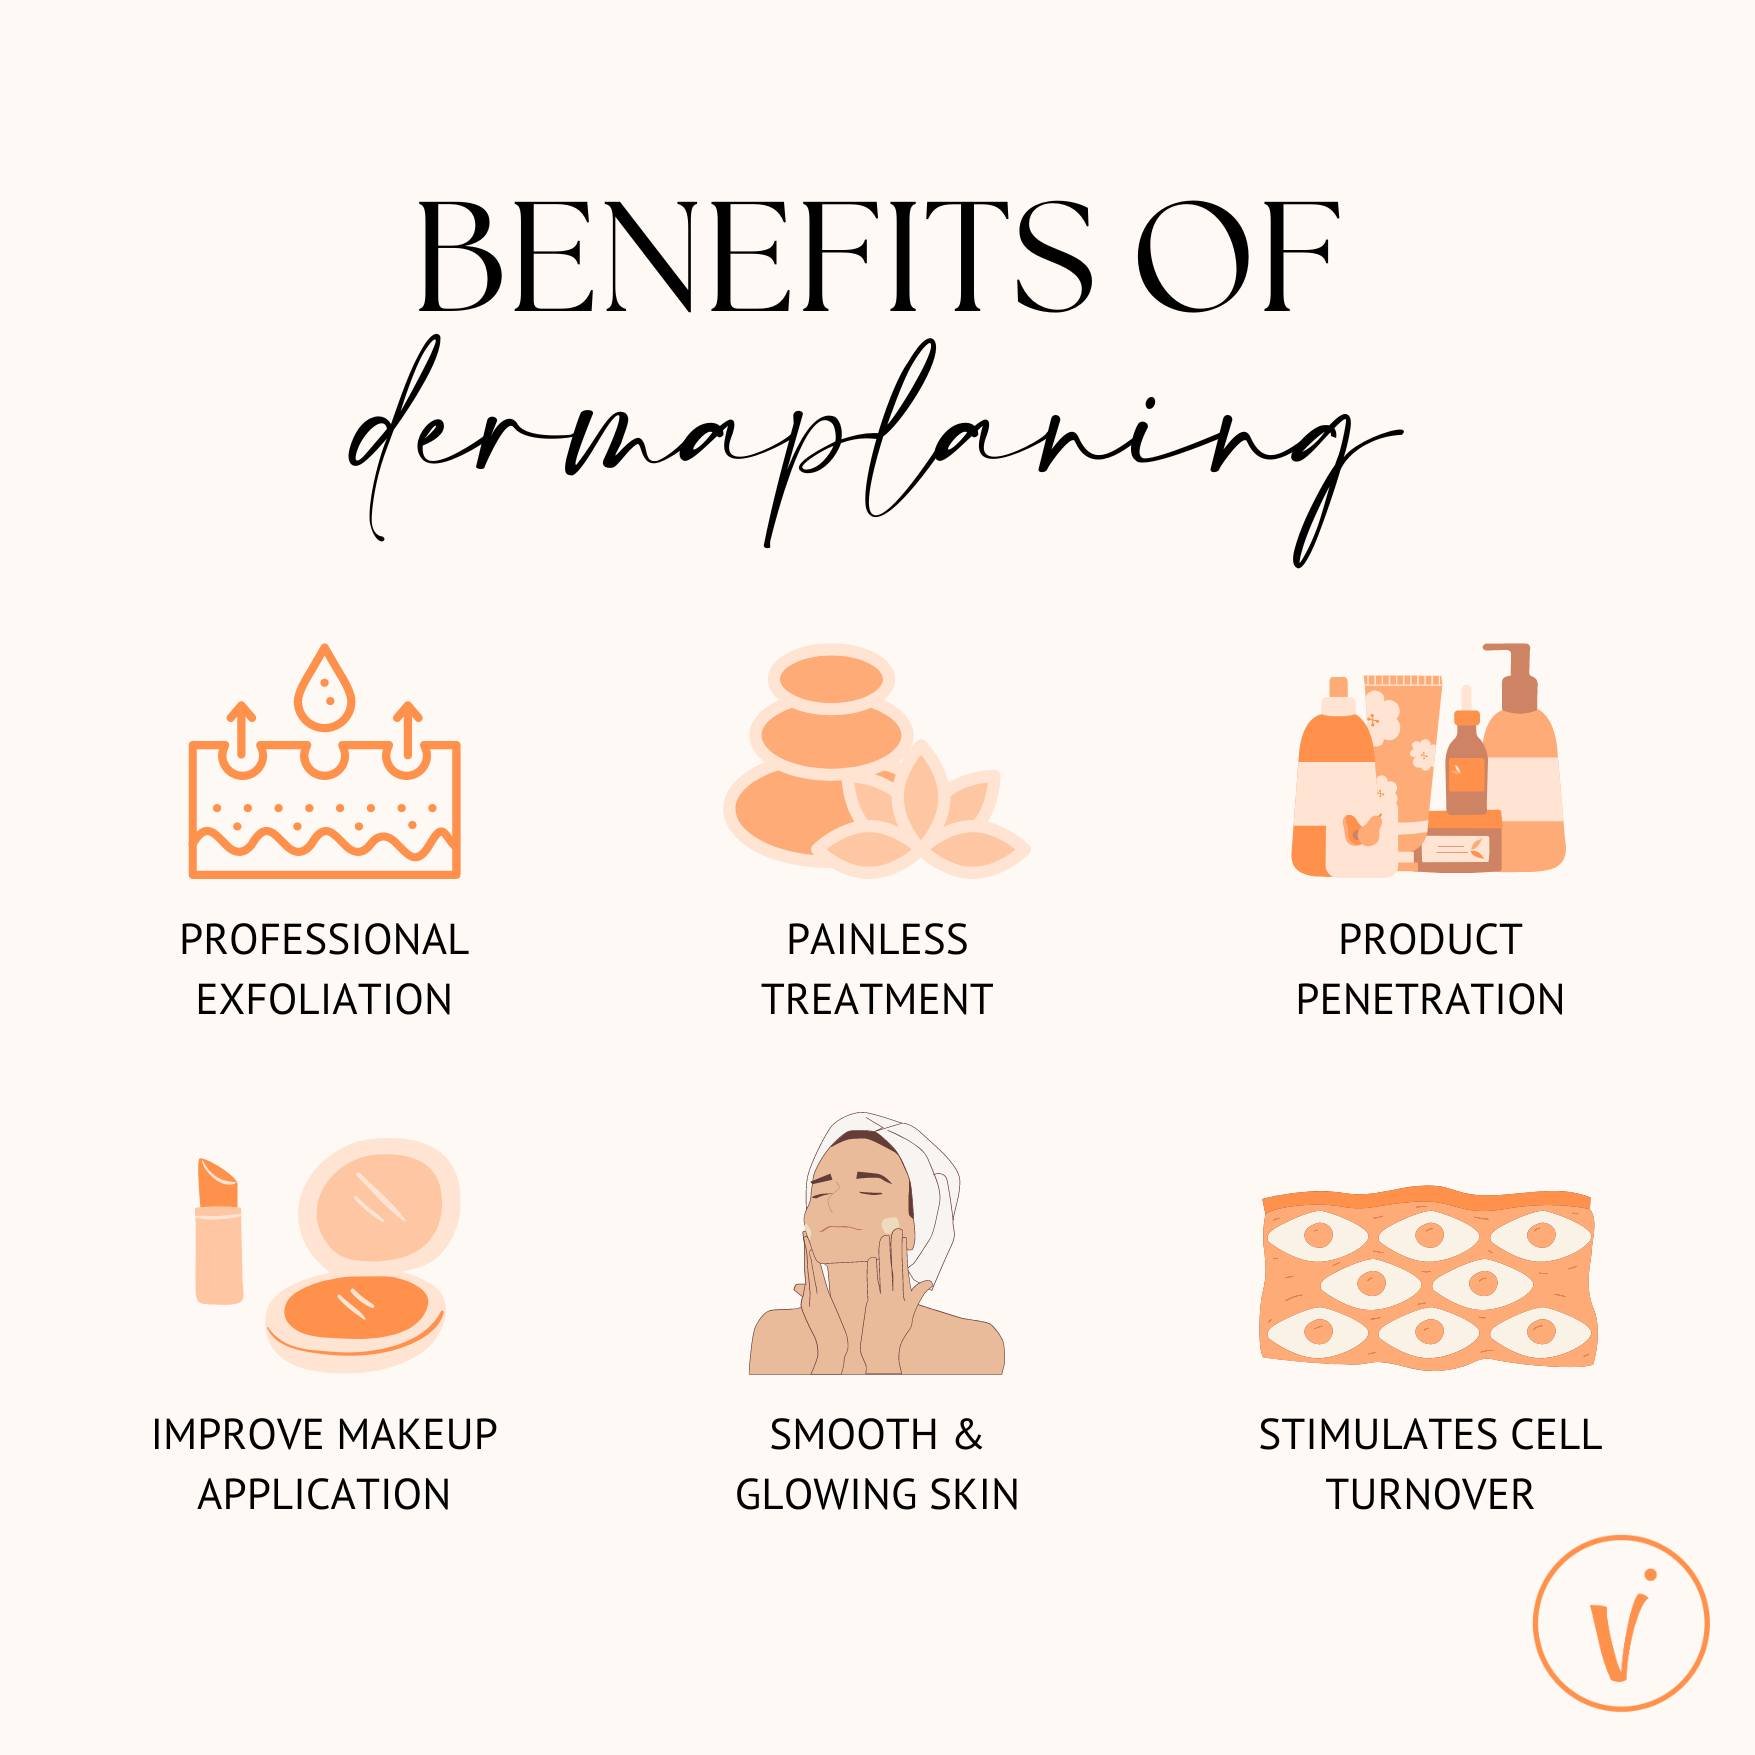 Dermaplaning: The Ultimate Exfoliation Treatment✨🧖&zwj;♀️

✨Exfoliation removes dead cells and built-up debris on the skin's surface, resulting in smoother and brighter skin
✨Dermaplaning is totally non-invasive, and it doesn't harm or traumatize yo